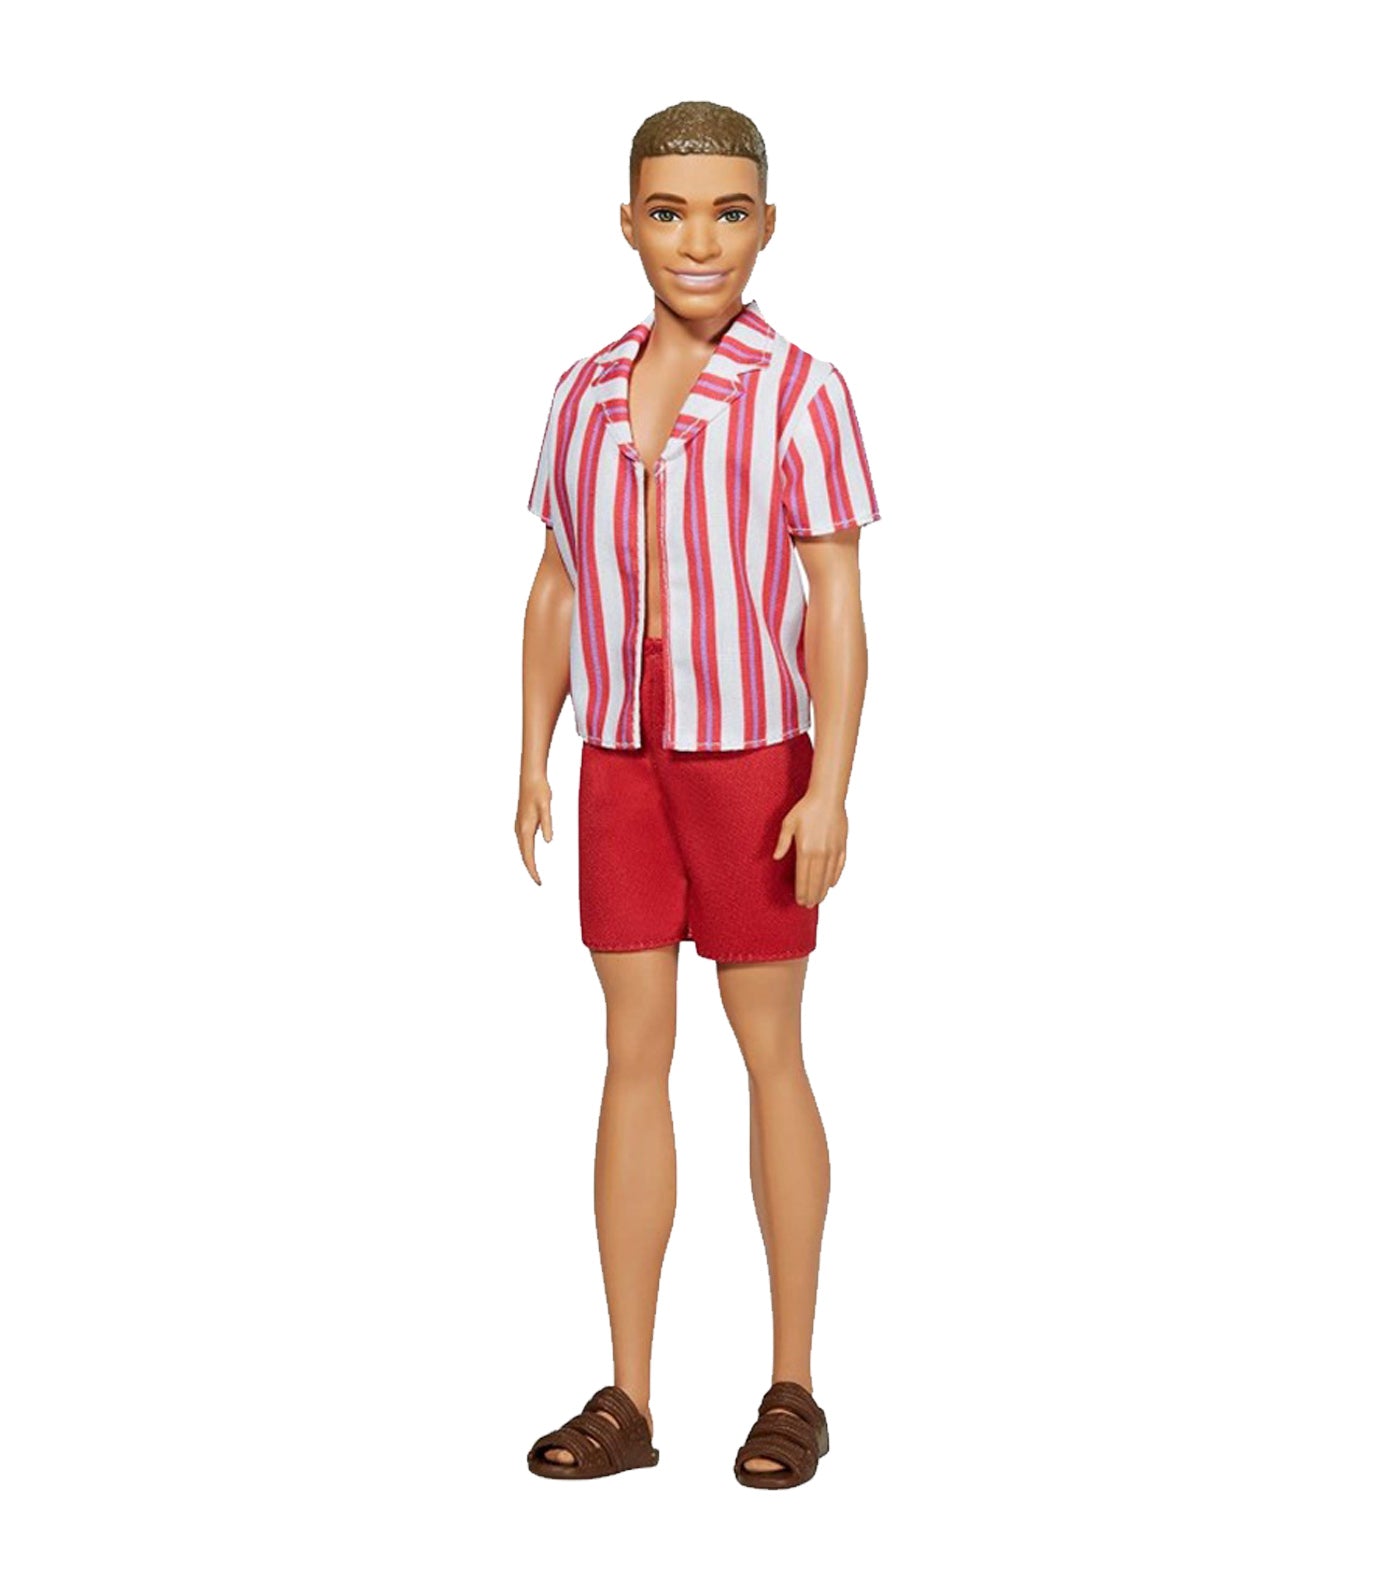 ken™ 60th anniversary doll in throwback beach look with swimsuit and sandals